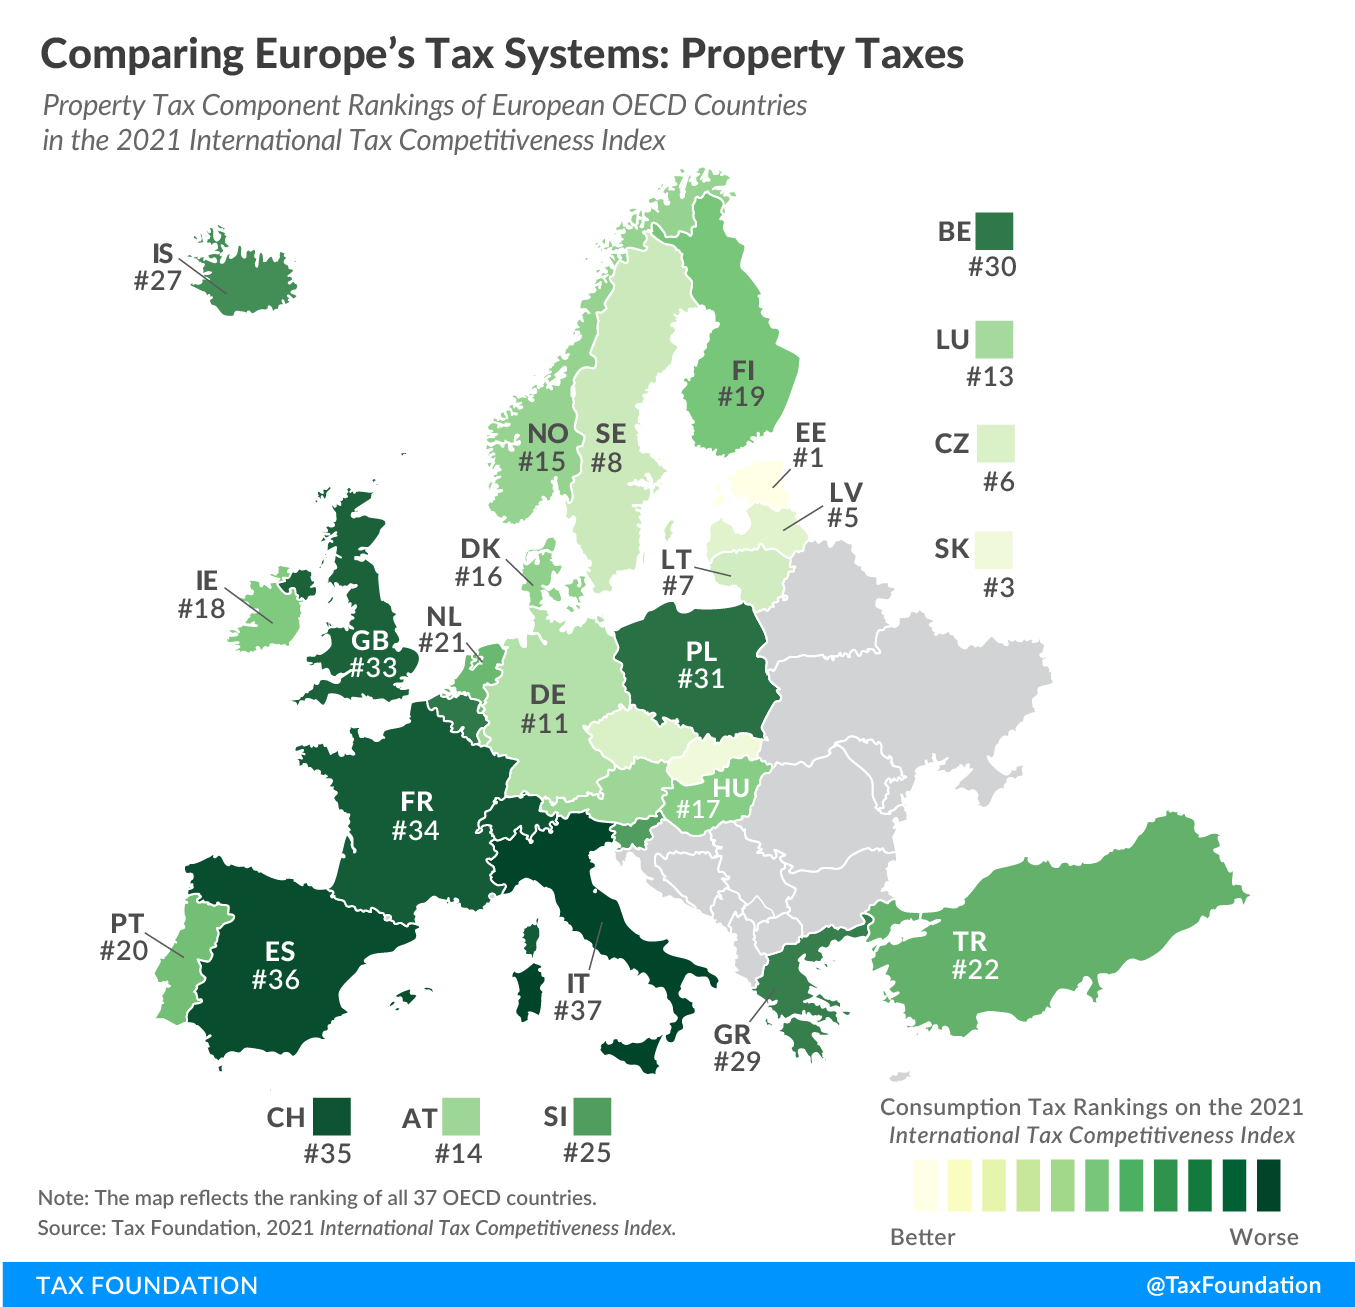 Comparing-Property-Tax-Systems-in-Europe-2021-Comparing-Europes-Tax-Systems-Property-Tax-Systems-Best-and-Worst-Property-Tax-Systems.png